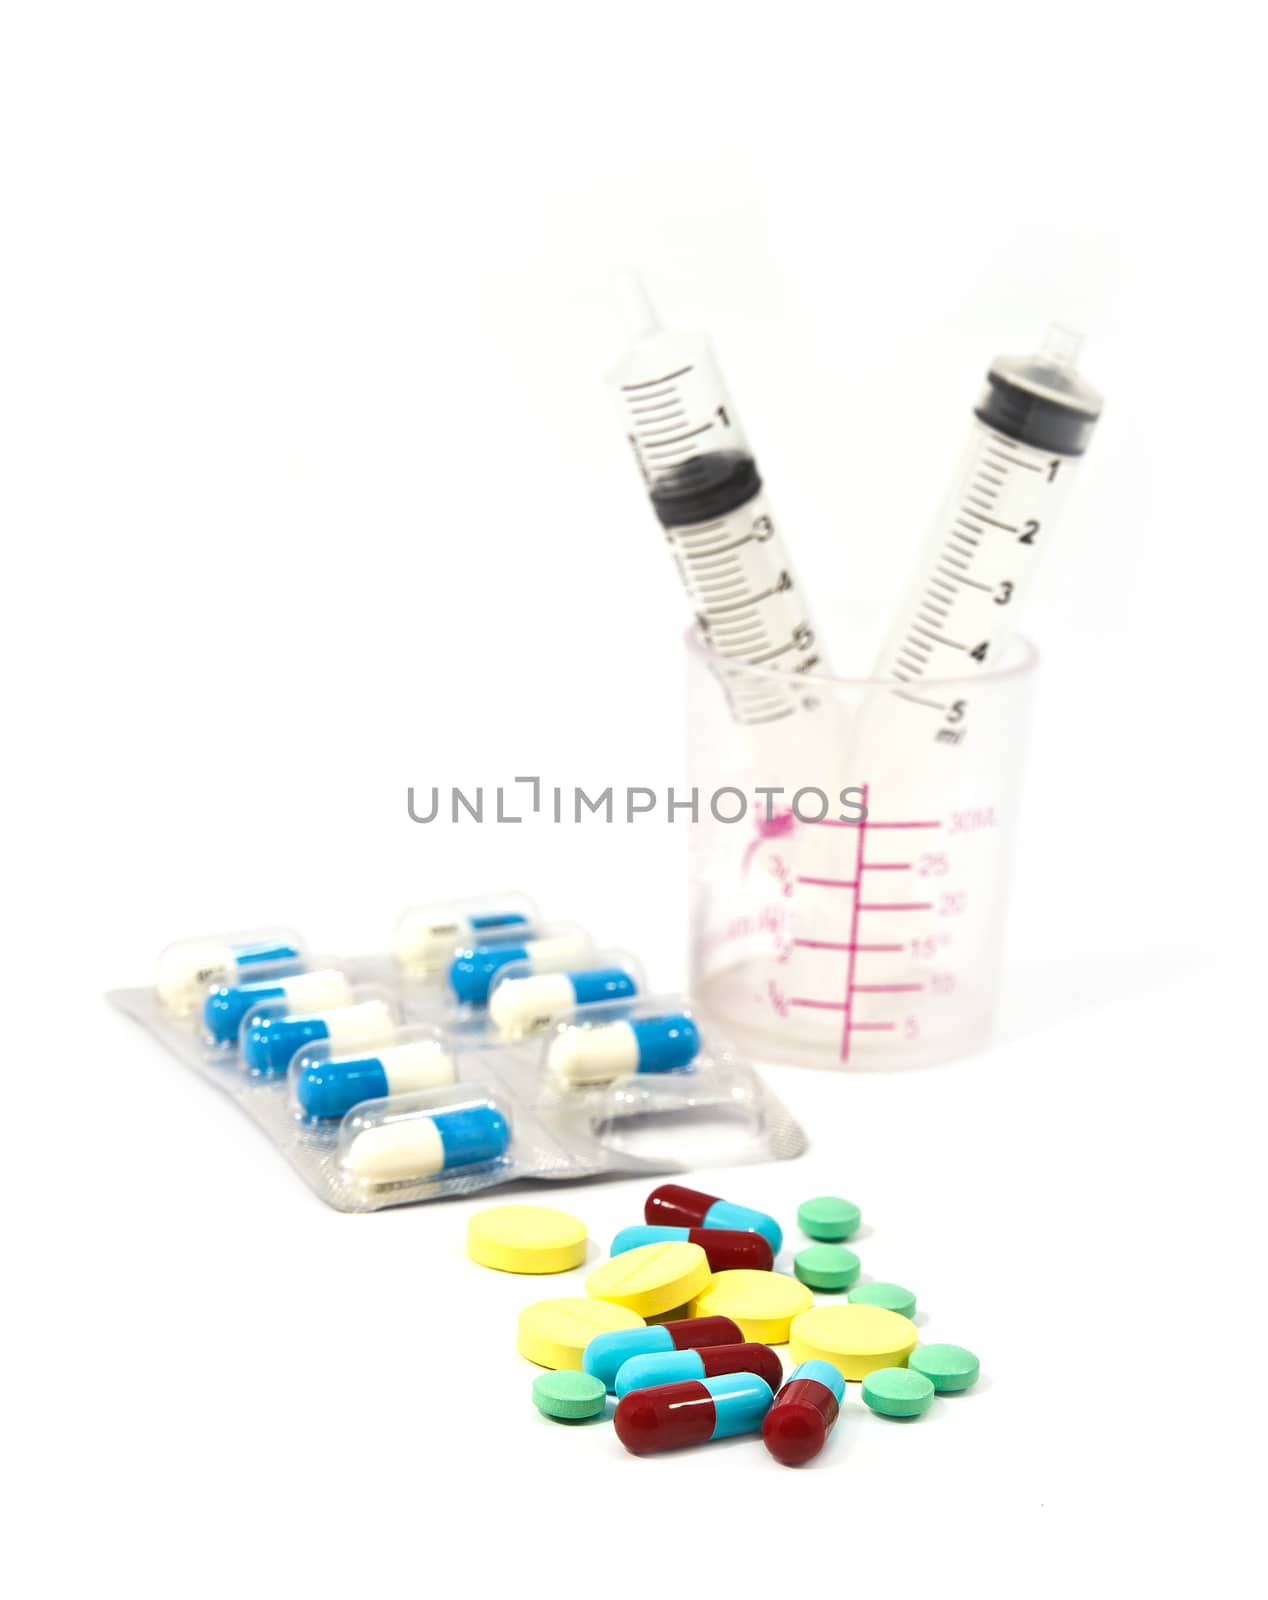 Medicine pills and tablet with syringe in the bottles